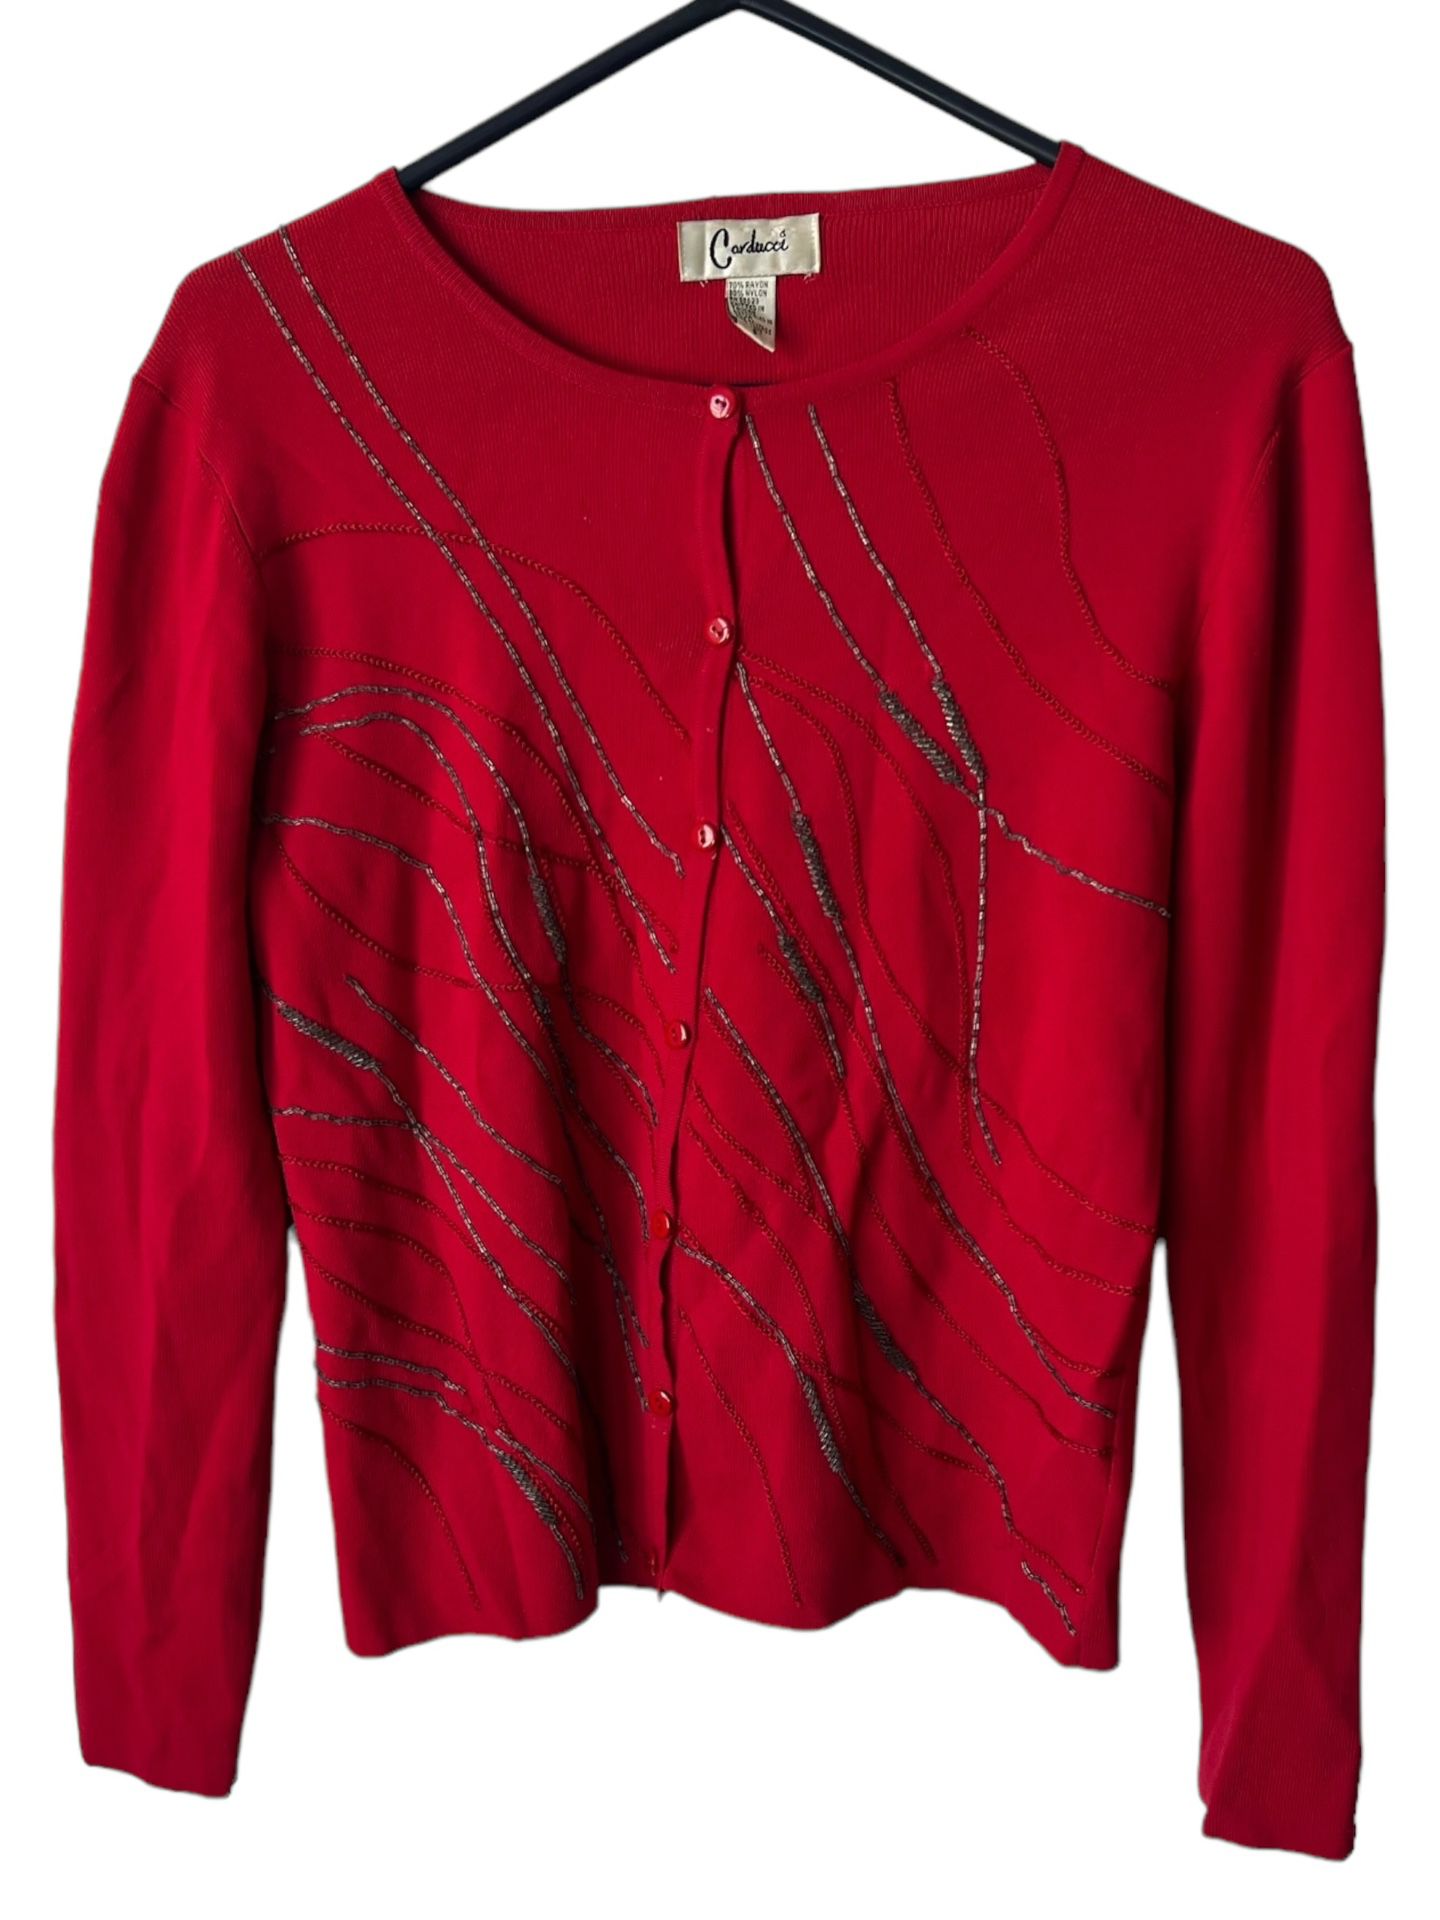 Carducci Vintage Red Beaded Long Sleeve Stretch Sweater Cardigan Women's Small  Some beading is missing very minimal can’t hardly notice.  Comes from 